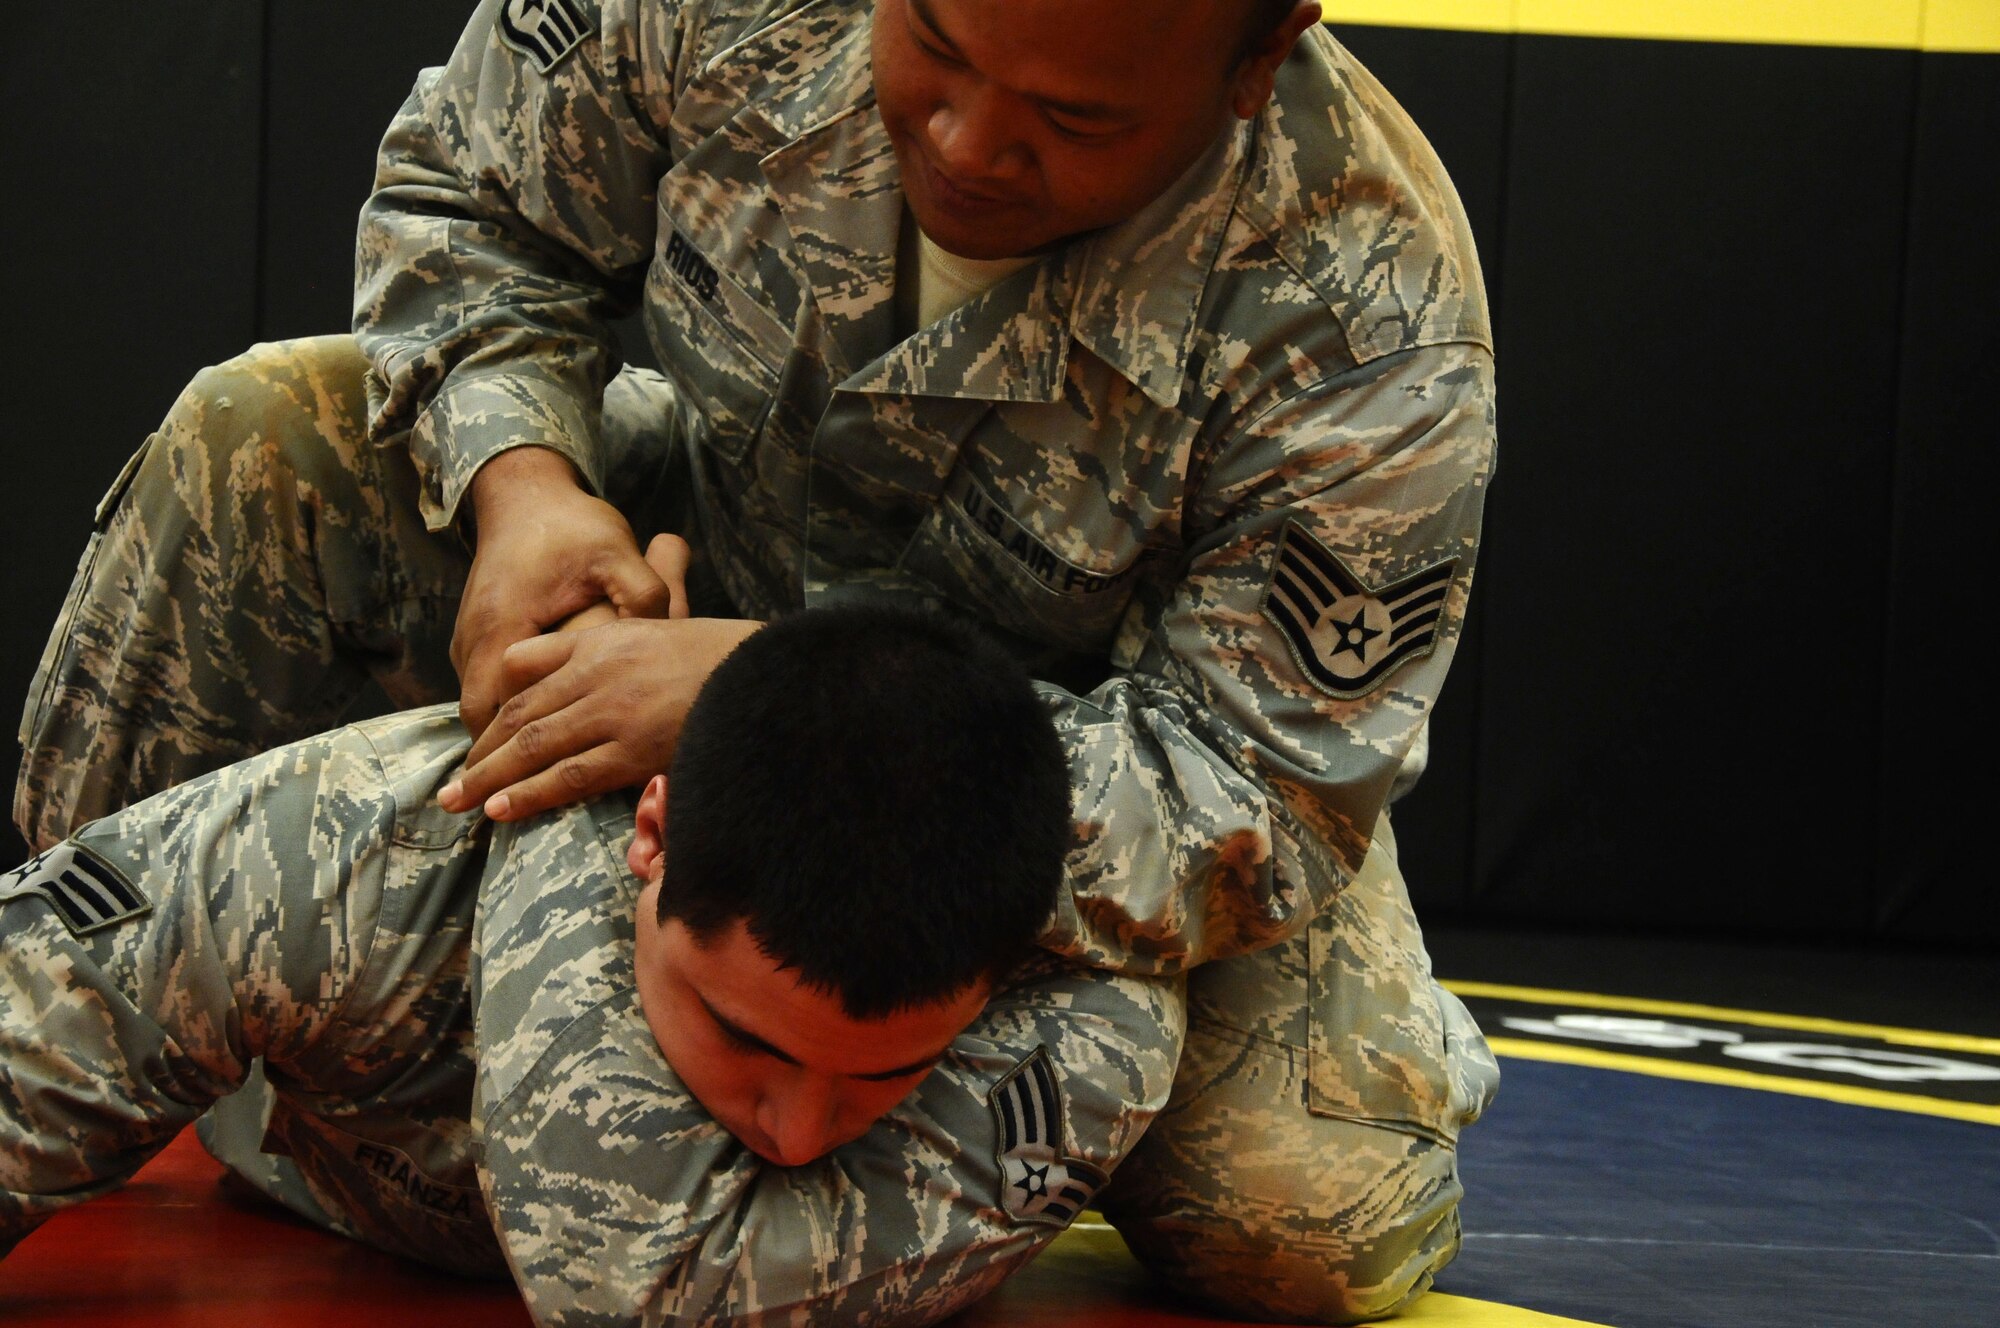 Senior Airman Daniel Franza, 36th Contingency Response Group personnel journeyman, practices a choke hold on Staff Sgt. John Rios, 36th Mobility Response Squadron aerial porter, during a combatives training scenario at the Pacific Regional Training Center on Northwest Field, Guam, June 26, 2013. The training was part of a new sustainment training program that will become part of a monthly regimen designed to keep Airmen current on skills such as rules of engagement, use of force, integrated defense and rifle-fighting techniques. (U.S. Air Force photo by Airman 1st Class Mariah Haddenham/Released)